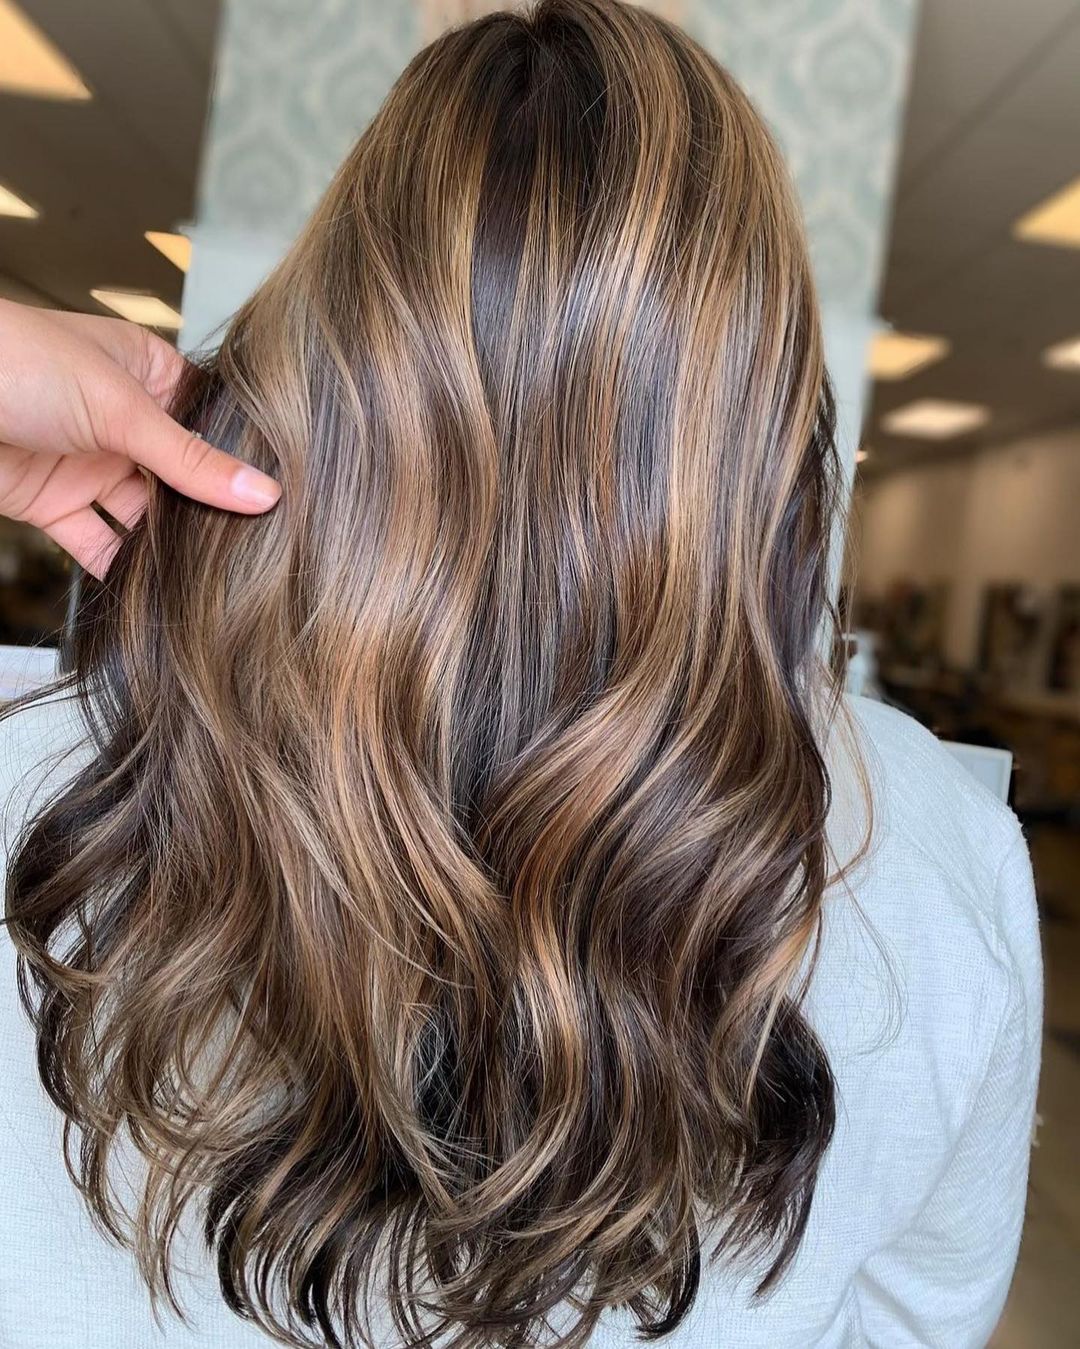 Balayage castano - Instagram: @hairby_angelle